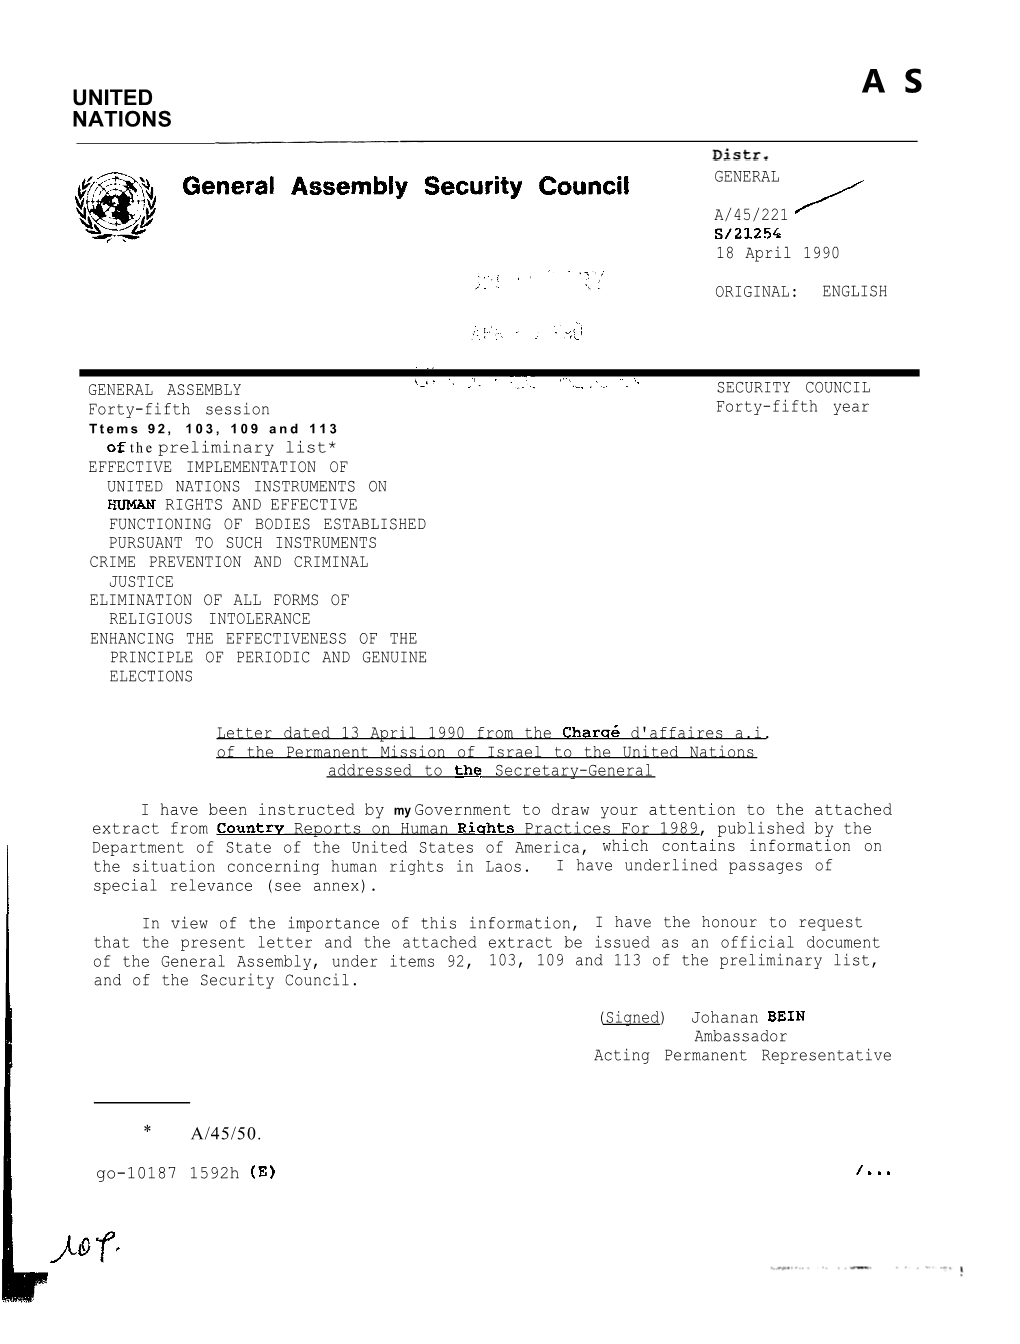 General Assembly Security Council GENERAL A/45/221 S/21254 18 April 1990